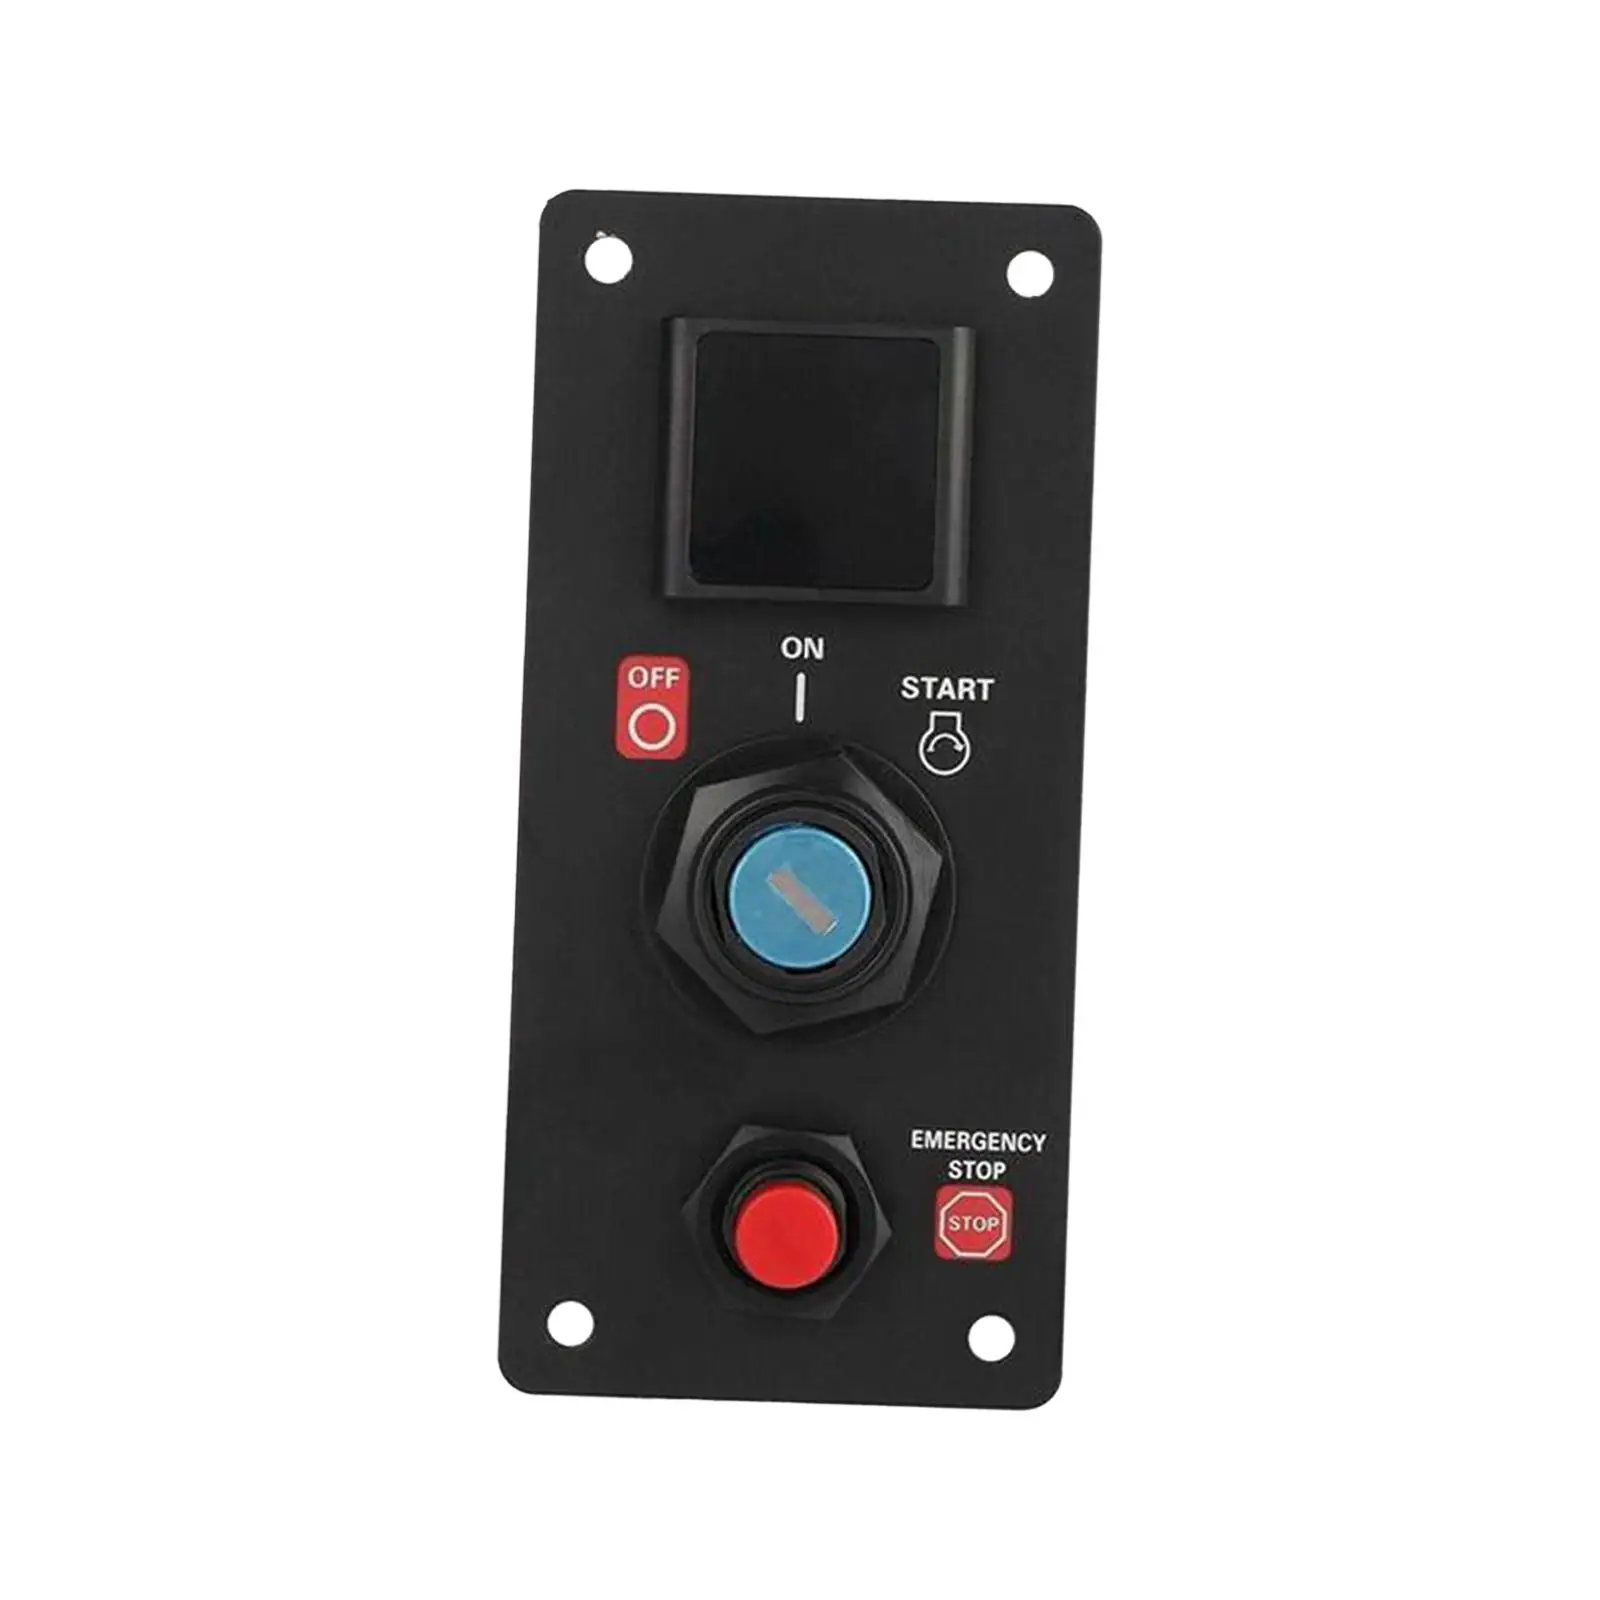 Ignition Switch 06323-zz5-764 Replace with Keys and Wire for Honda Outboard Accessories High Performance Easy Installation